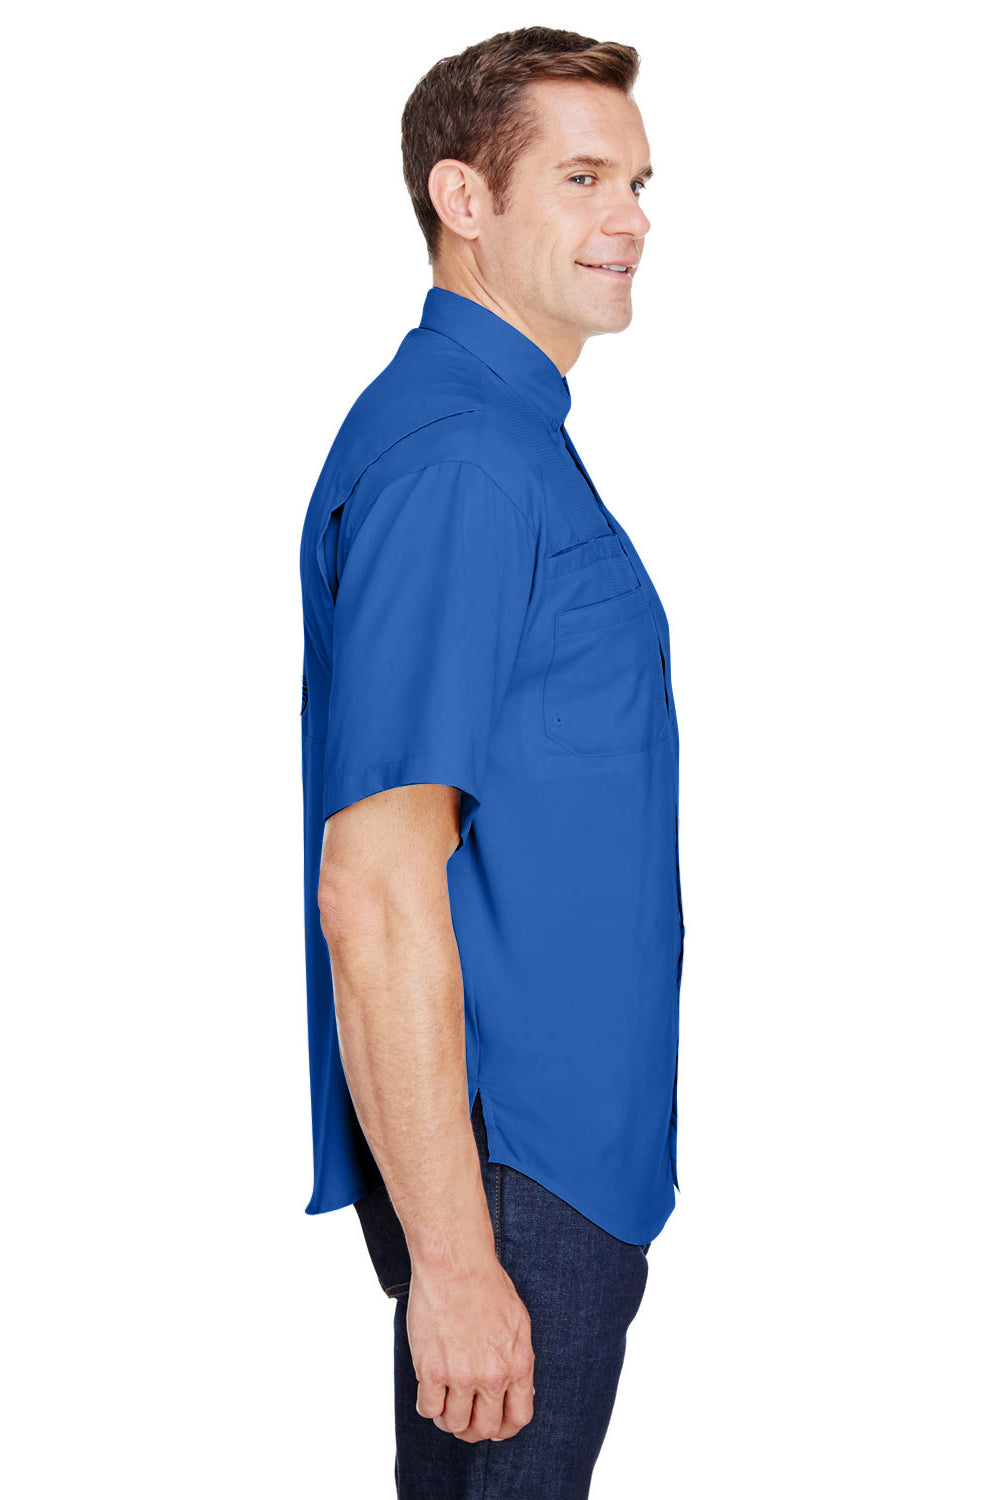 Columbia 7266 Mens Tamiami II Moisture Wicking Short Sleeve Button Down Shirt w/ Double Pockets Vivid Blue Side